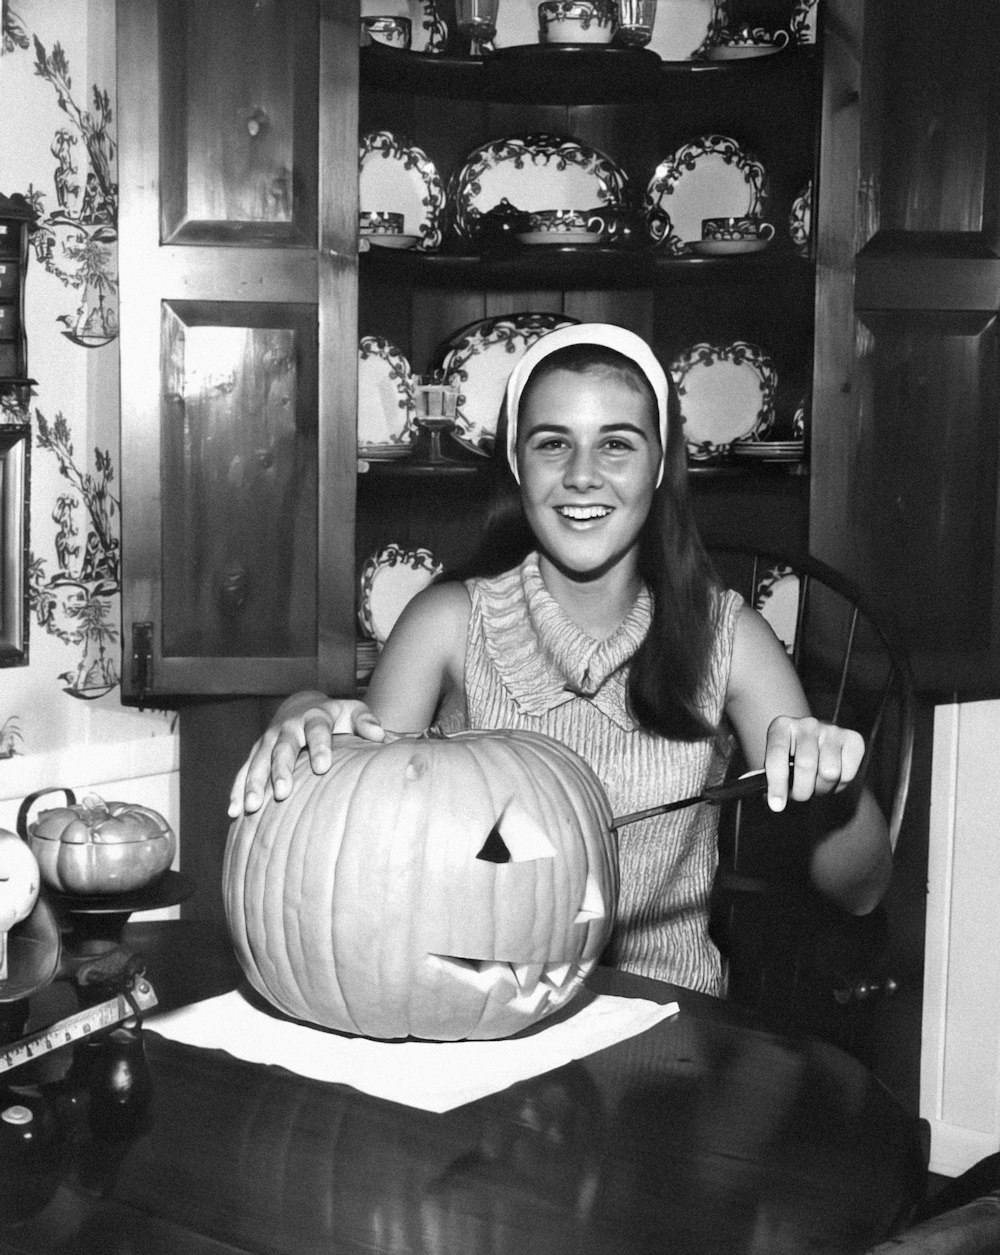 a black and white photo of a woman carving a pumpkin